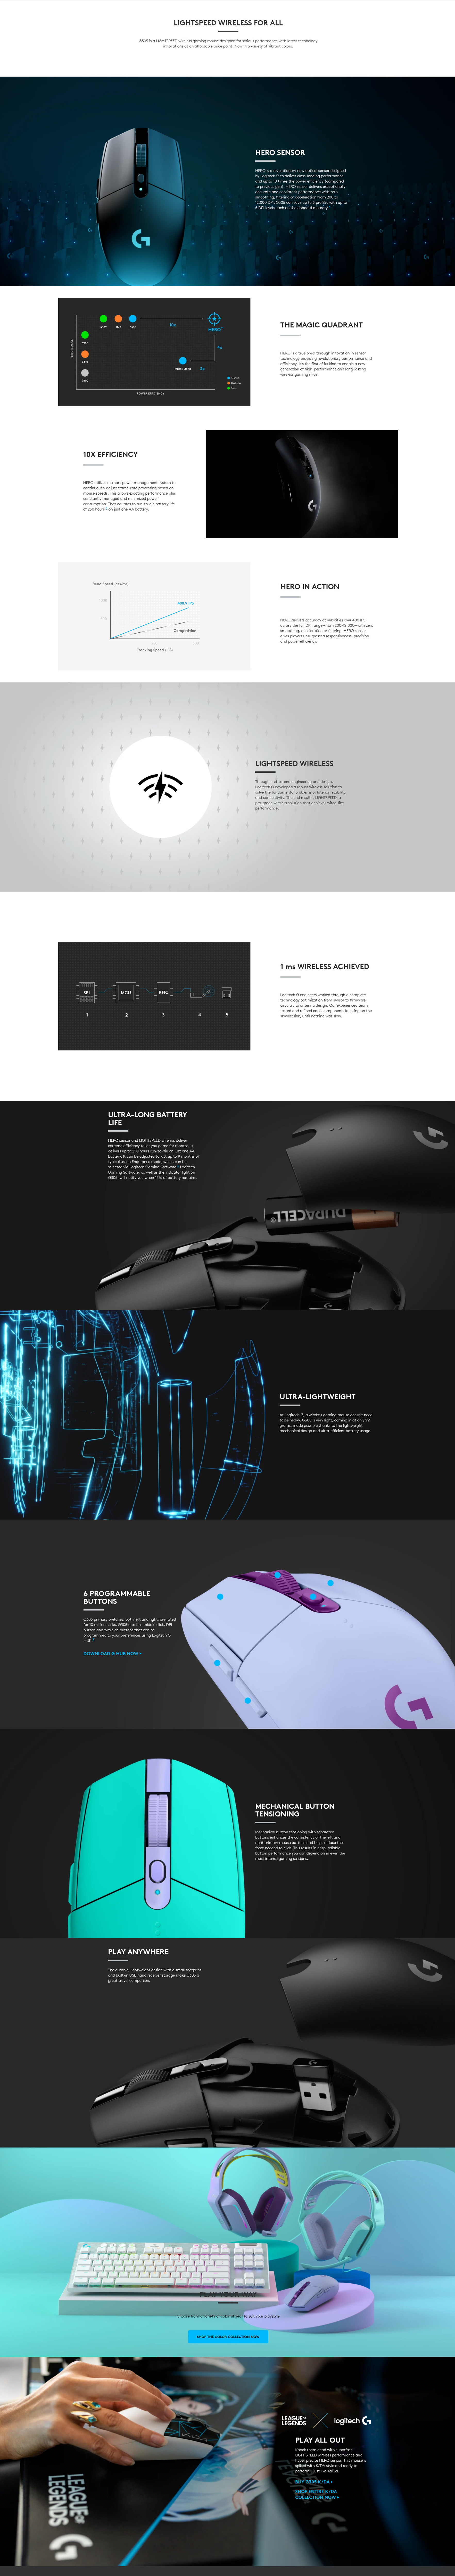 A large marketing image providing additional information about the product Logitech G305 LIGHTSPEED Wireless Optical Gaming Mouse - Mint - Additional alt info not provided